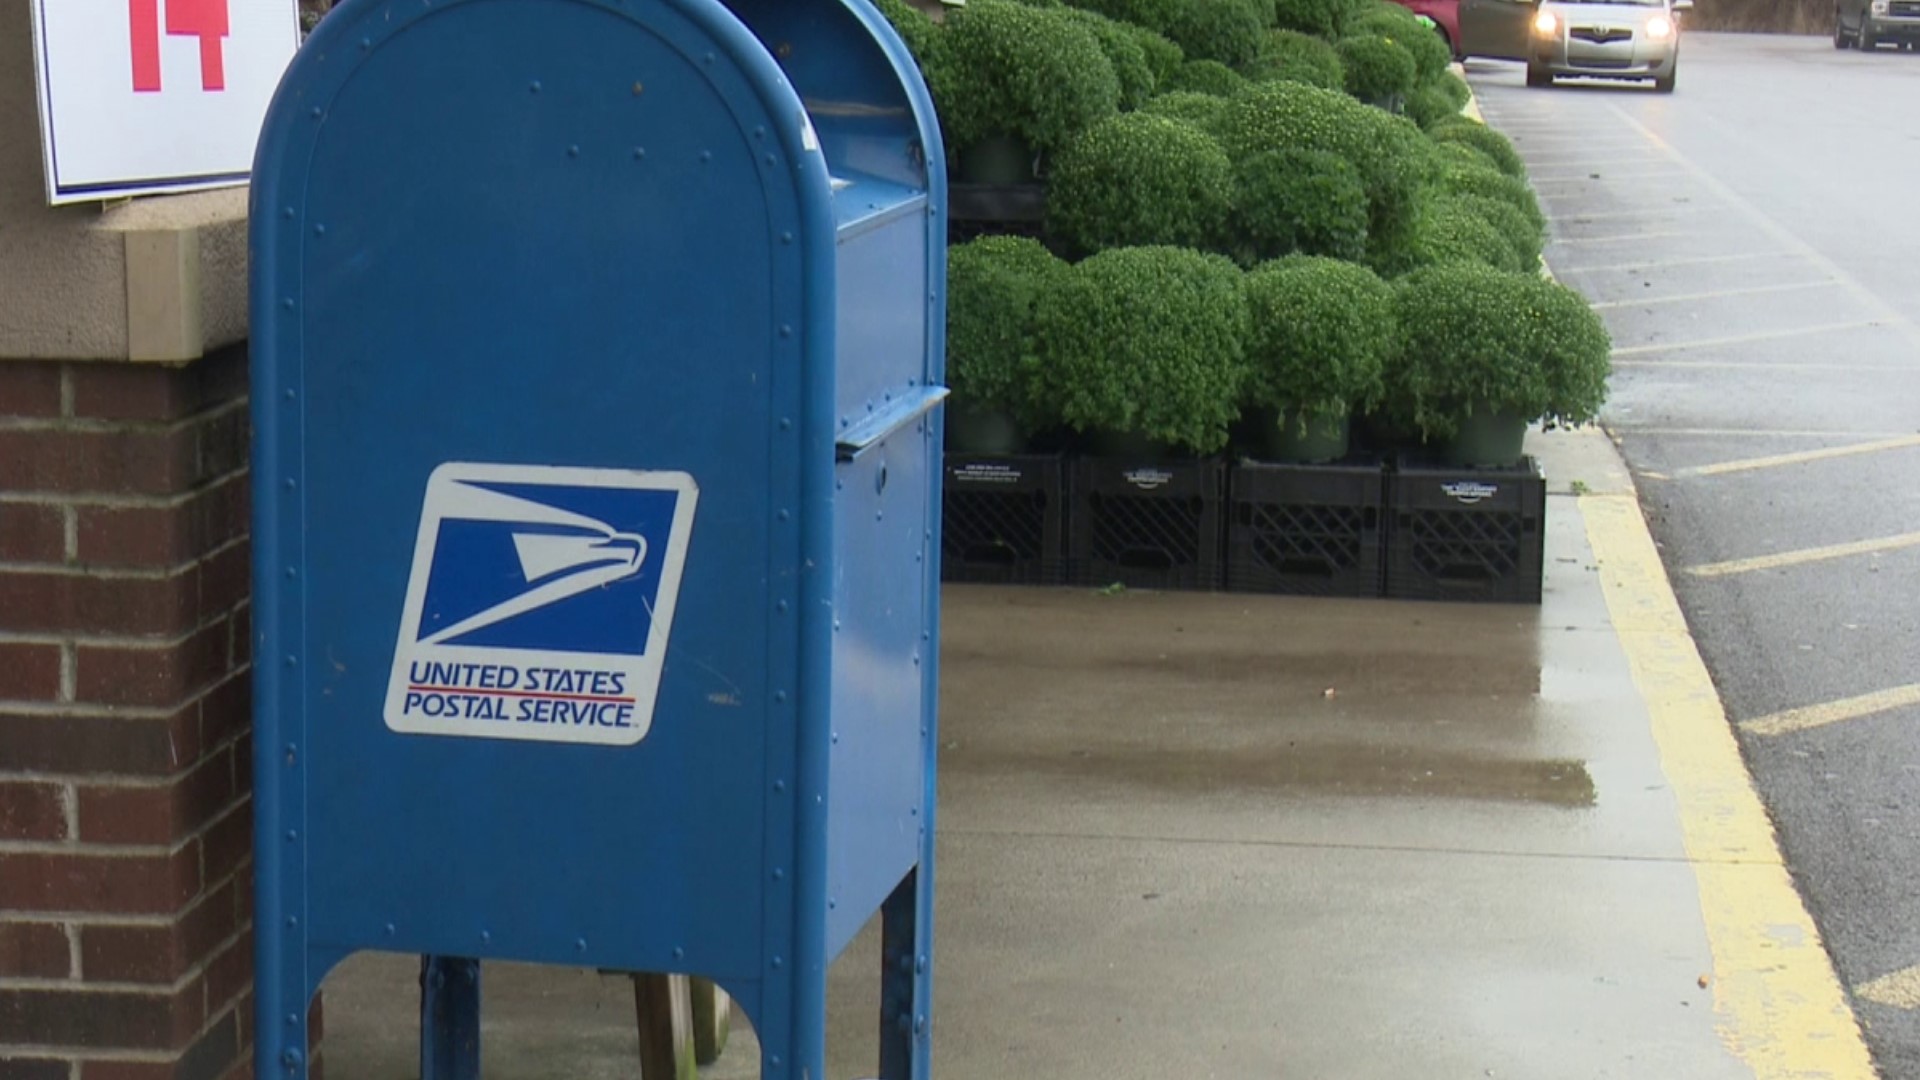 After another break-in at a USPS mailbox, a business owner in Luzerne County is warning her neighbors to take it seriously.